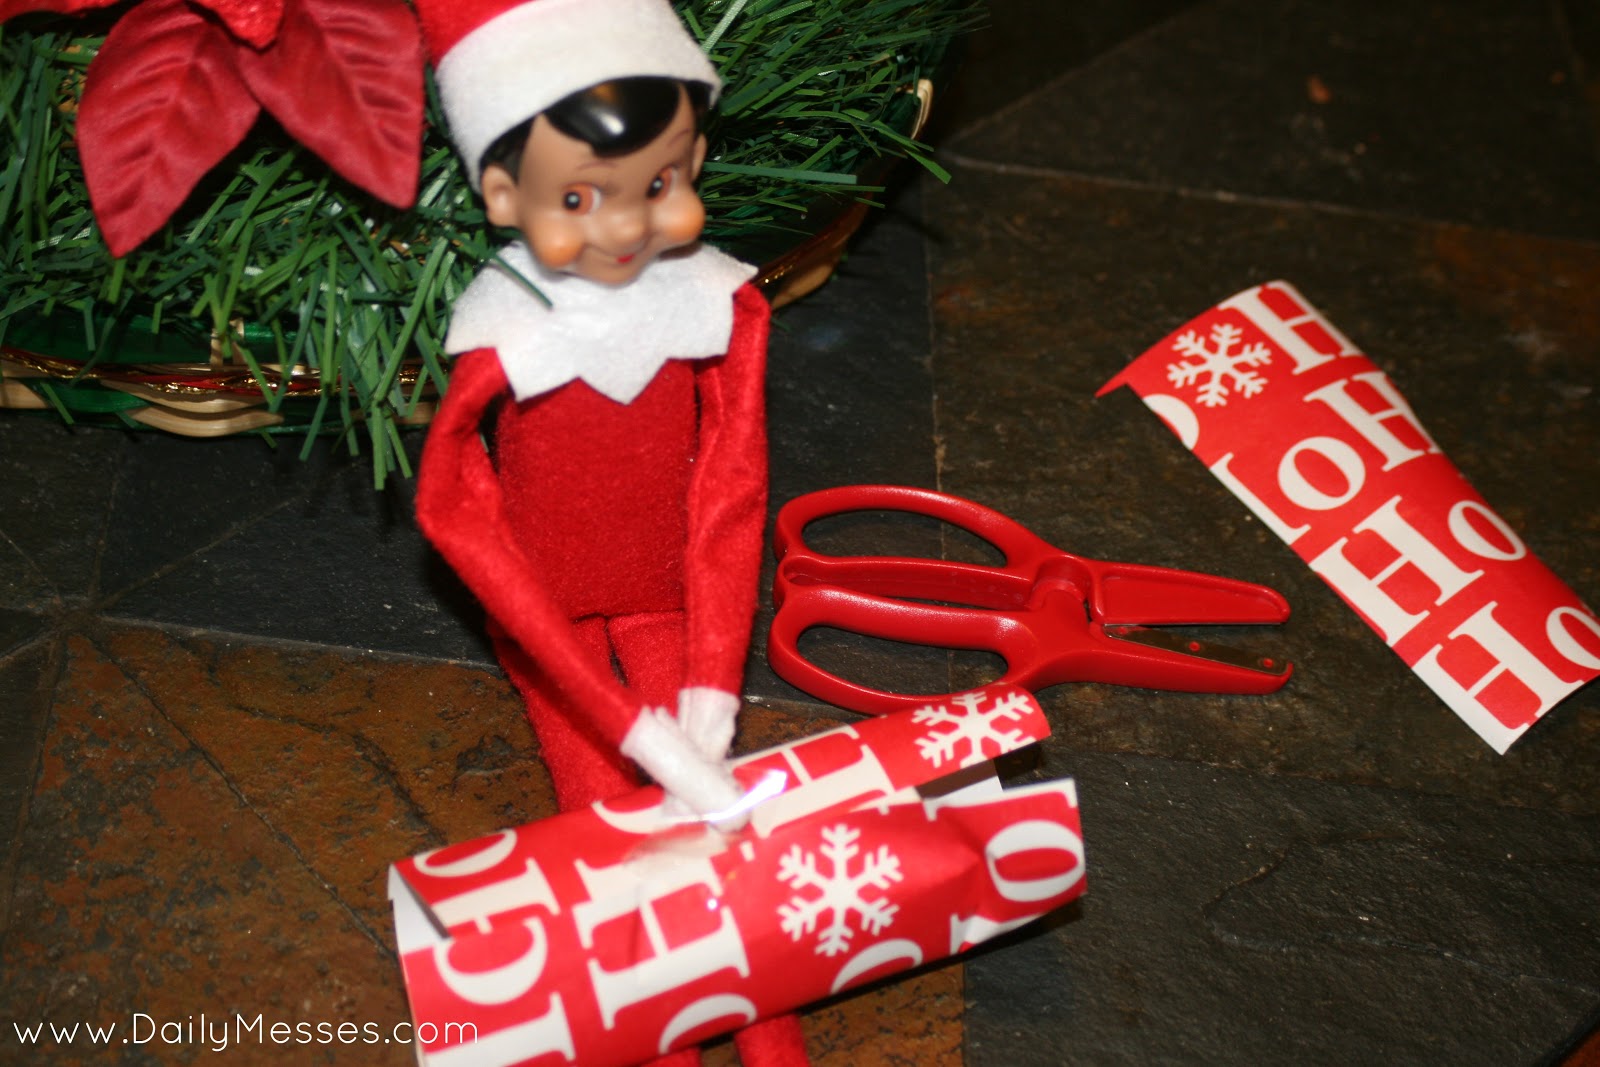 Daily Messes: Elf On The Shelf: Day 24